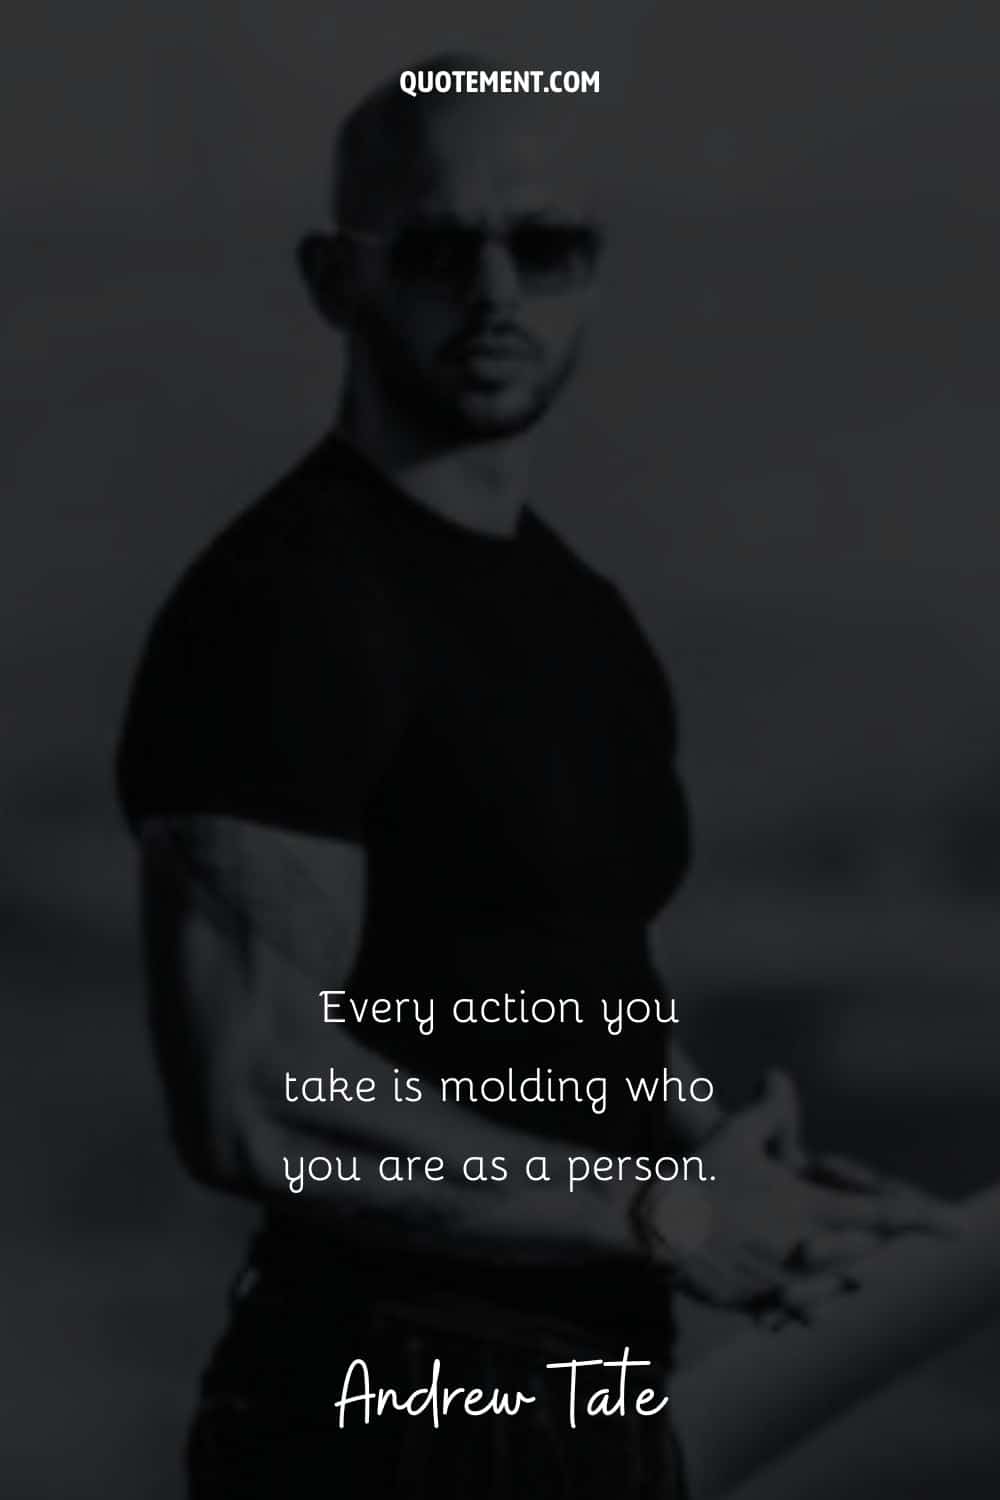 Every action you take is molding who you are as a person